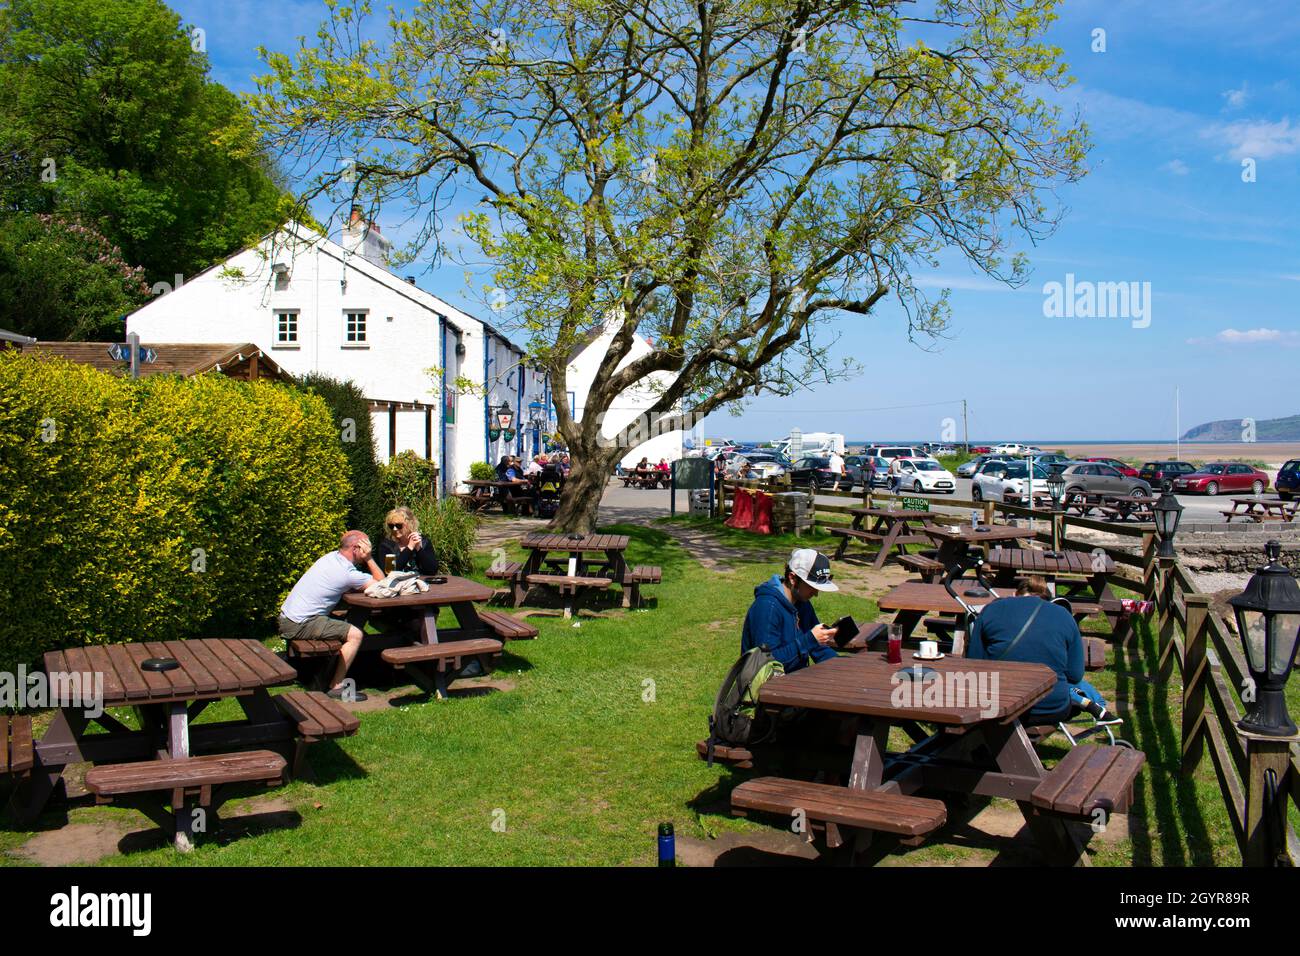 Anglesey - Wales - May 5 2016 : The old, charming Ship Inn at Red Wharf Bay View of the relaxed beer garden with holiday makers sat in the sun Landsca Stock Photo